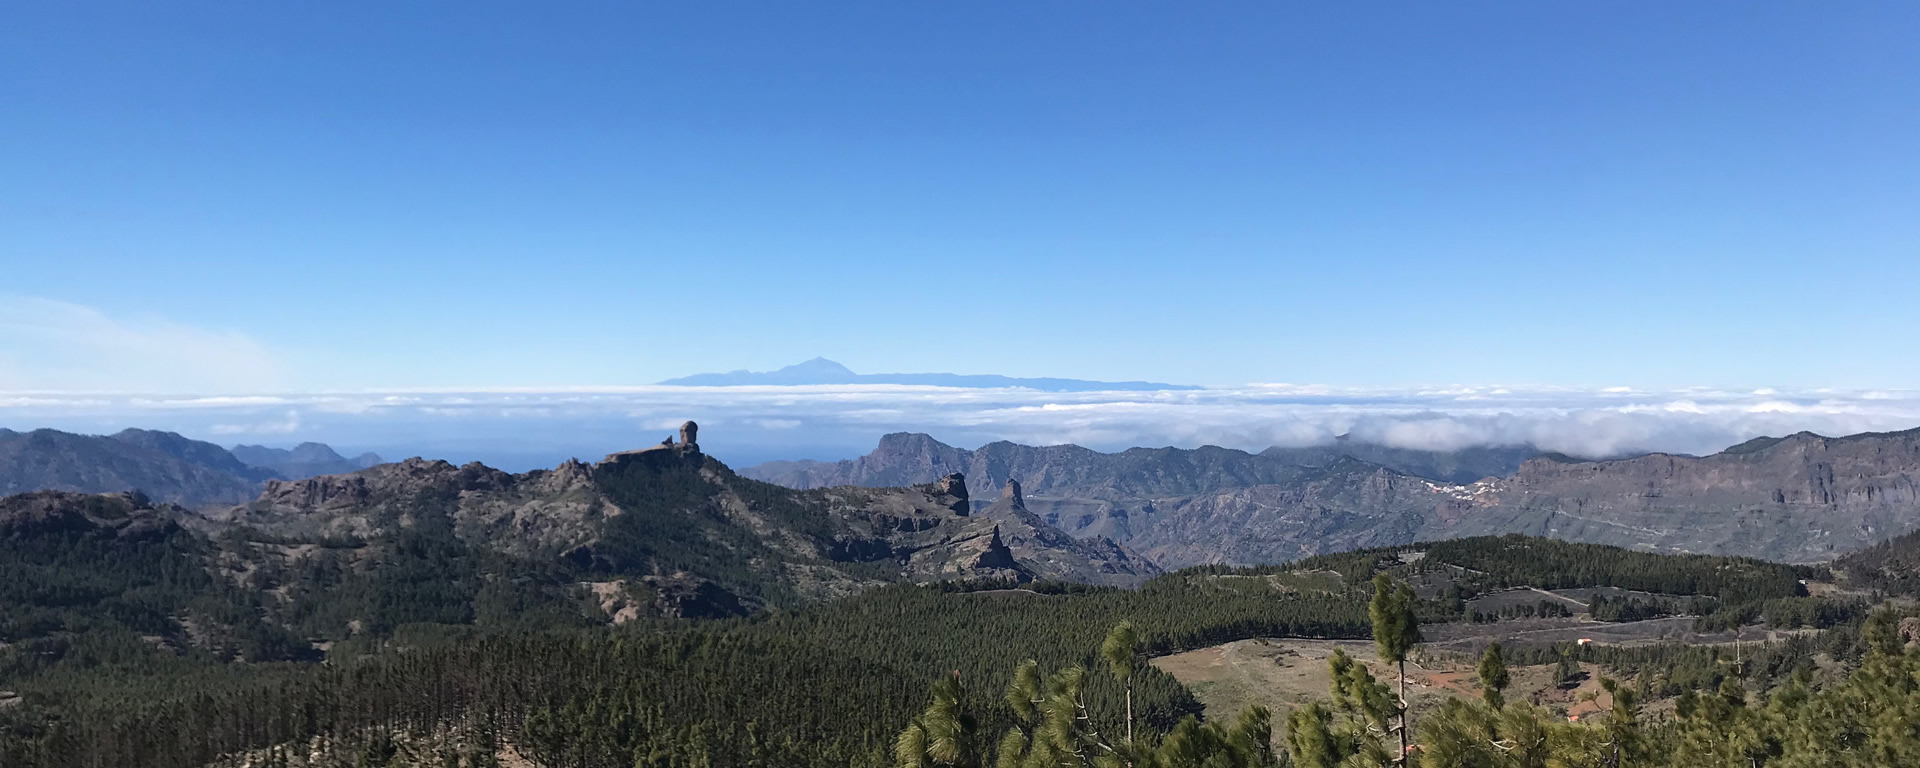 Gran Canaria panorama with our team